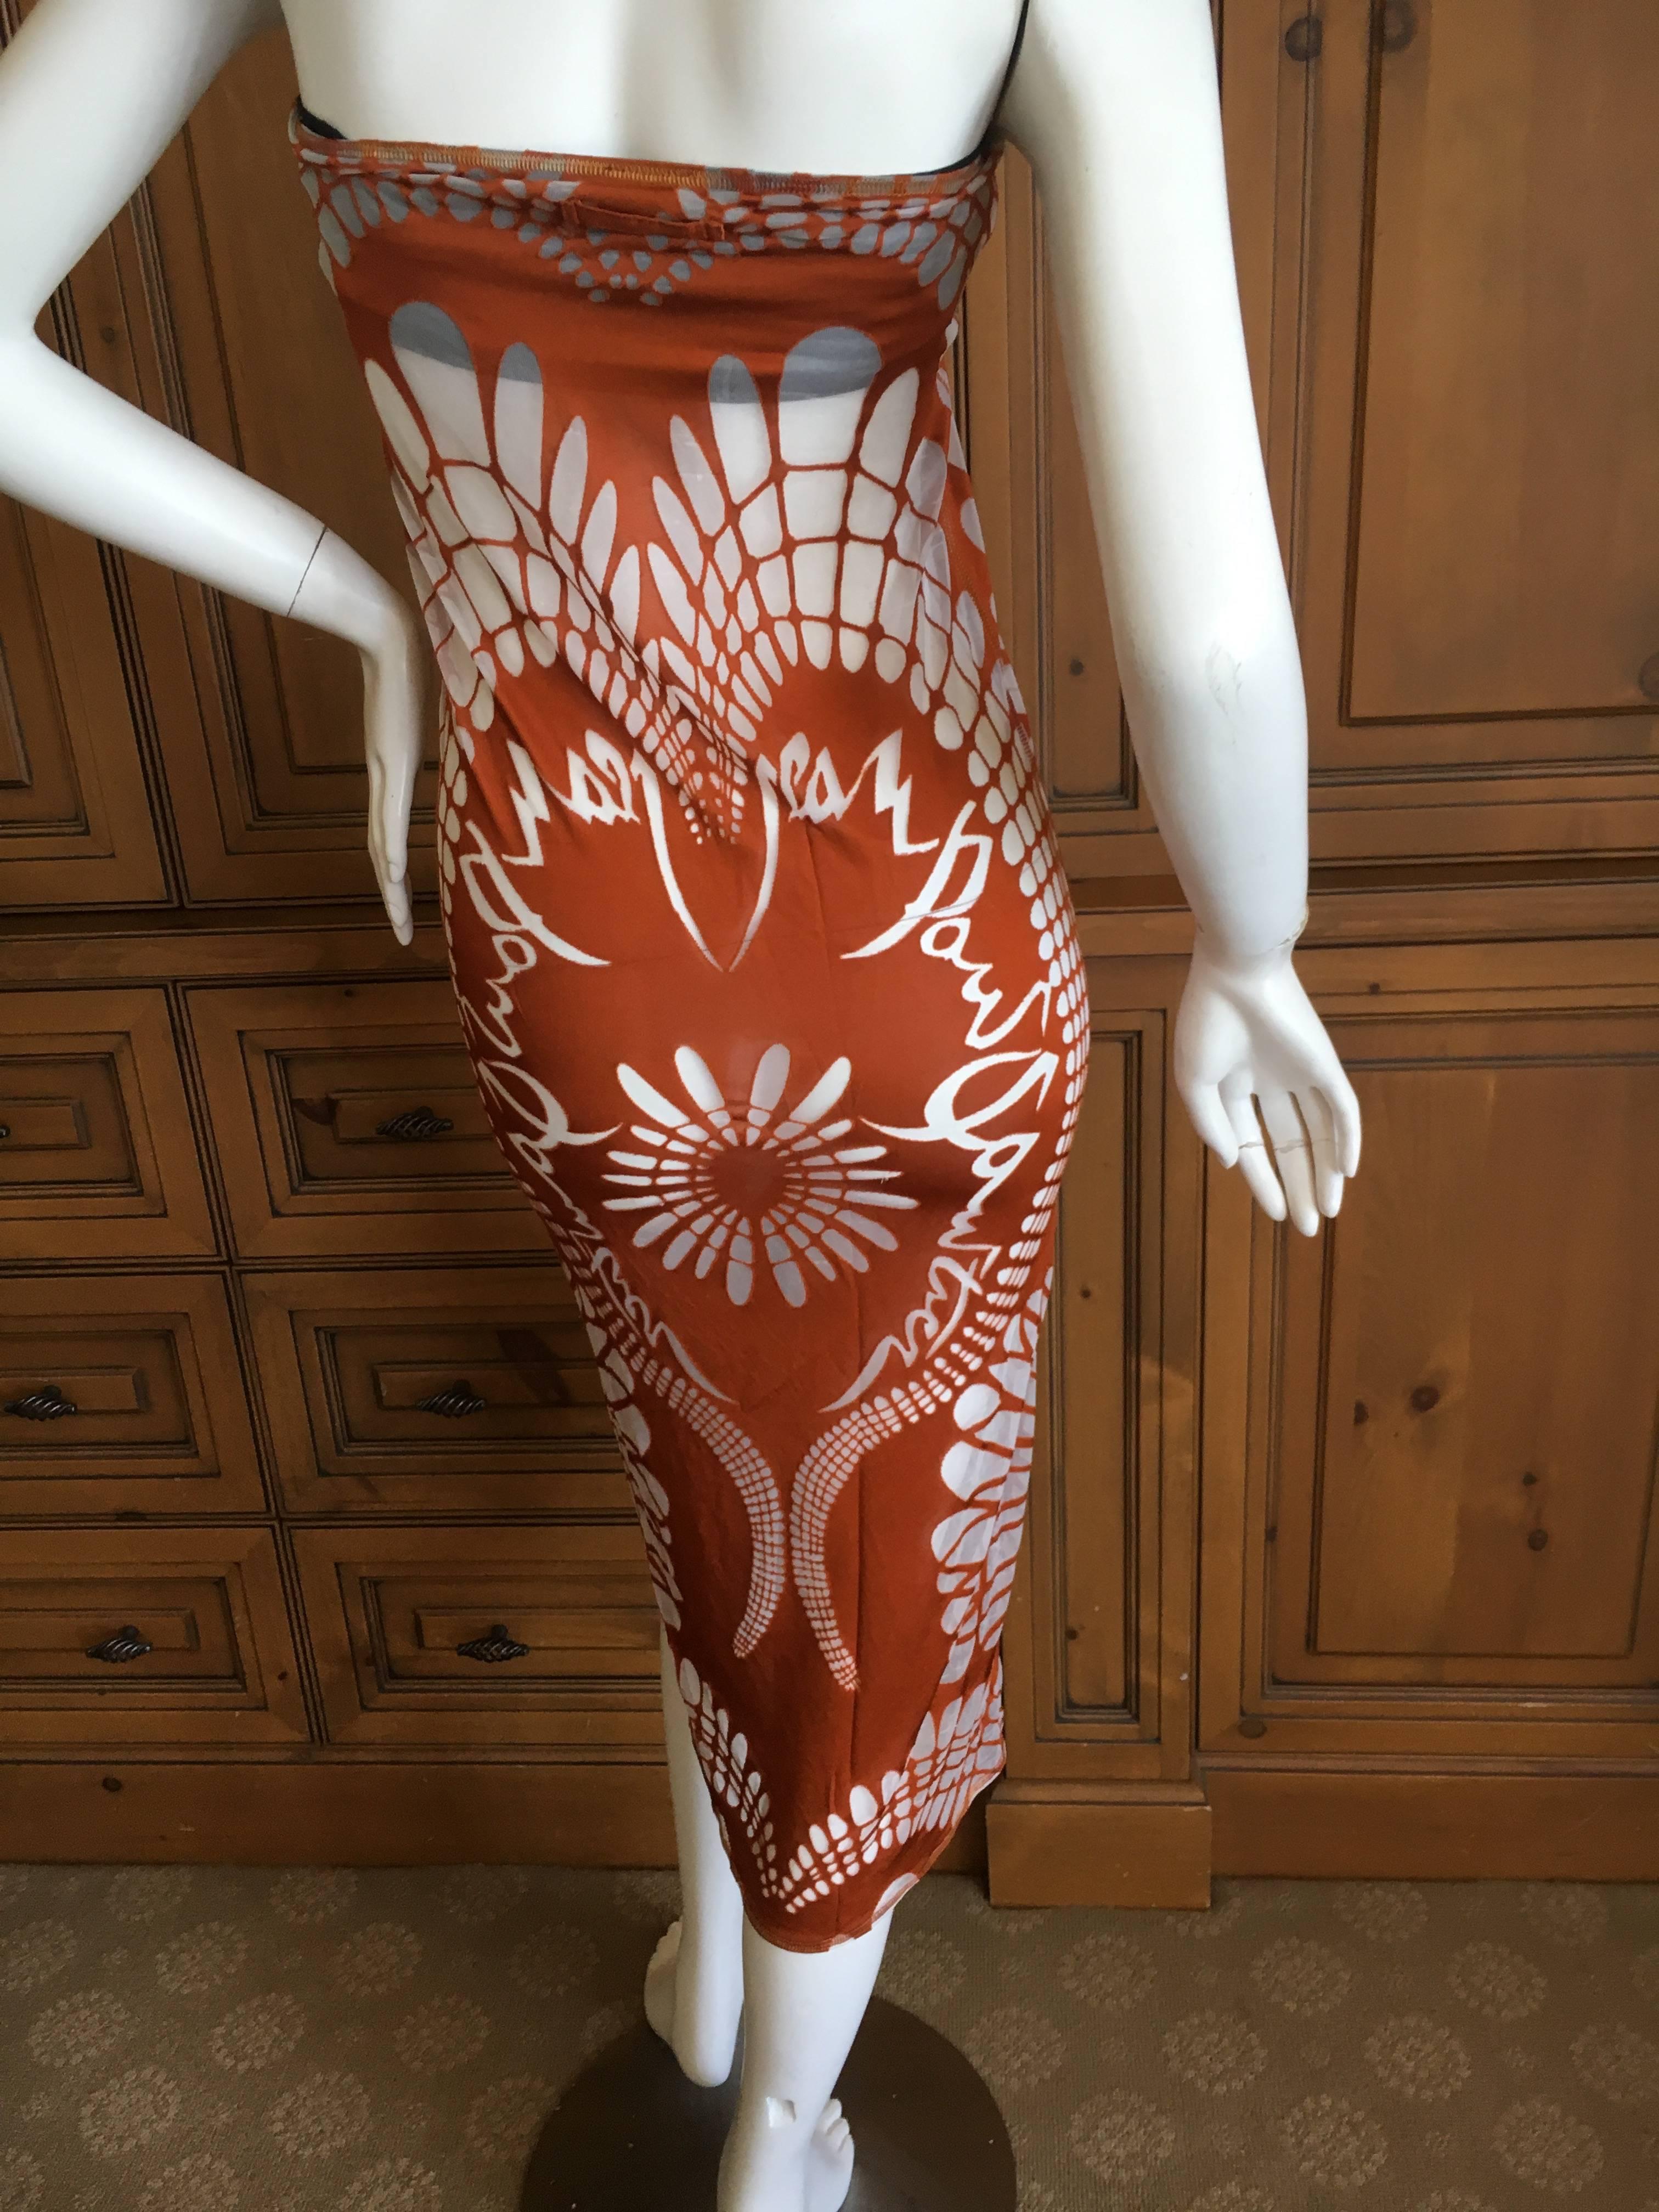 Jean Paul Gaultier Femme Vintage Sheer Maori Tattoo Skirt or Dress.
The original owner wore it as a tube dress, as I show it. It has a modesty band of black lining, which can easily be removed.
 Size 36
There is a lot of stretch
 Measurements are